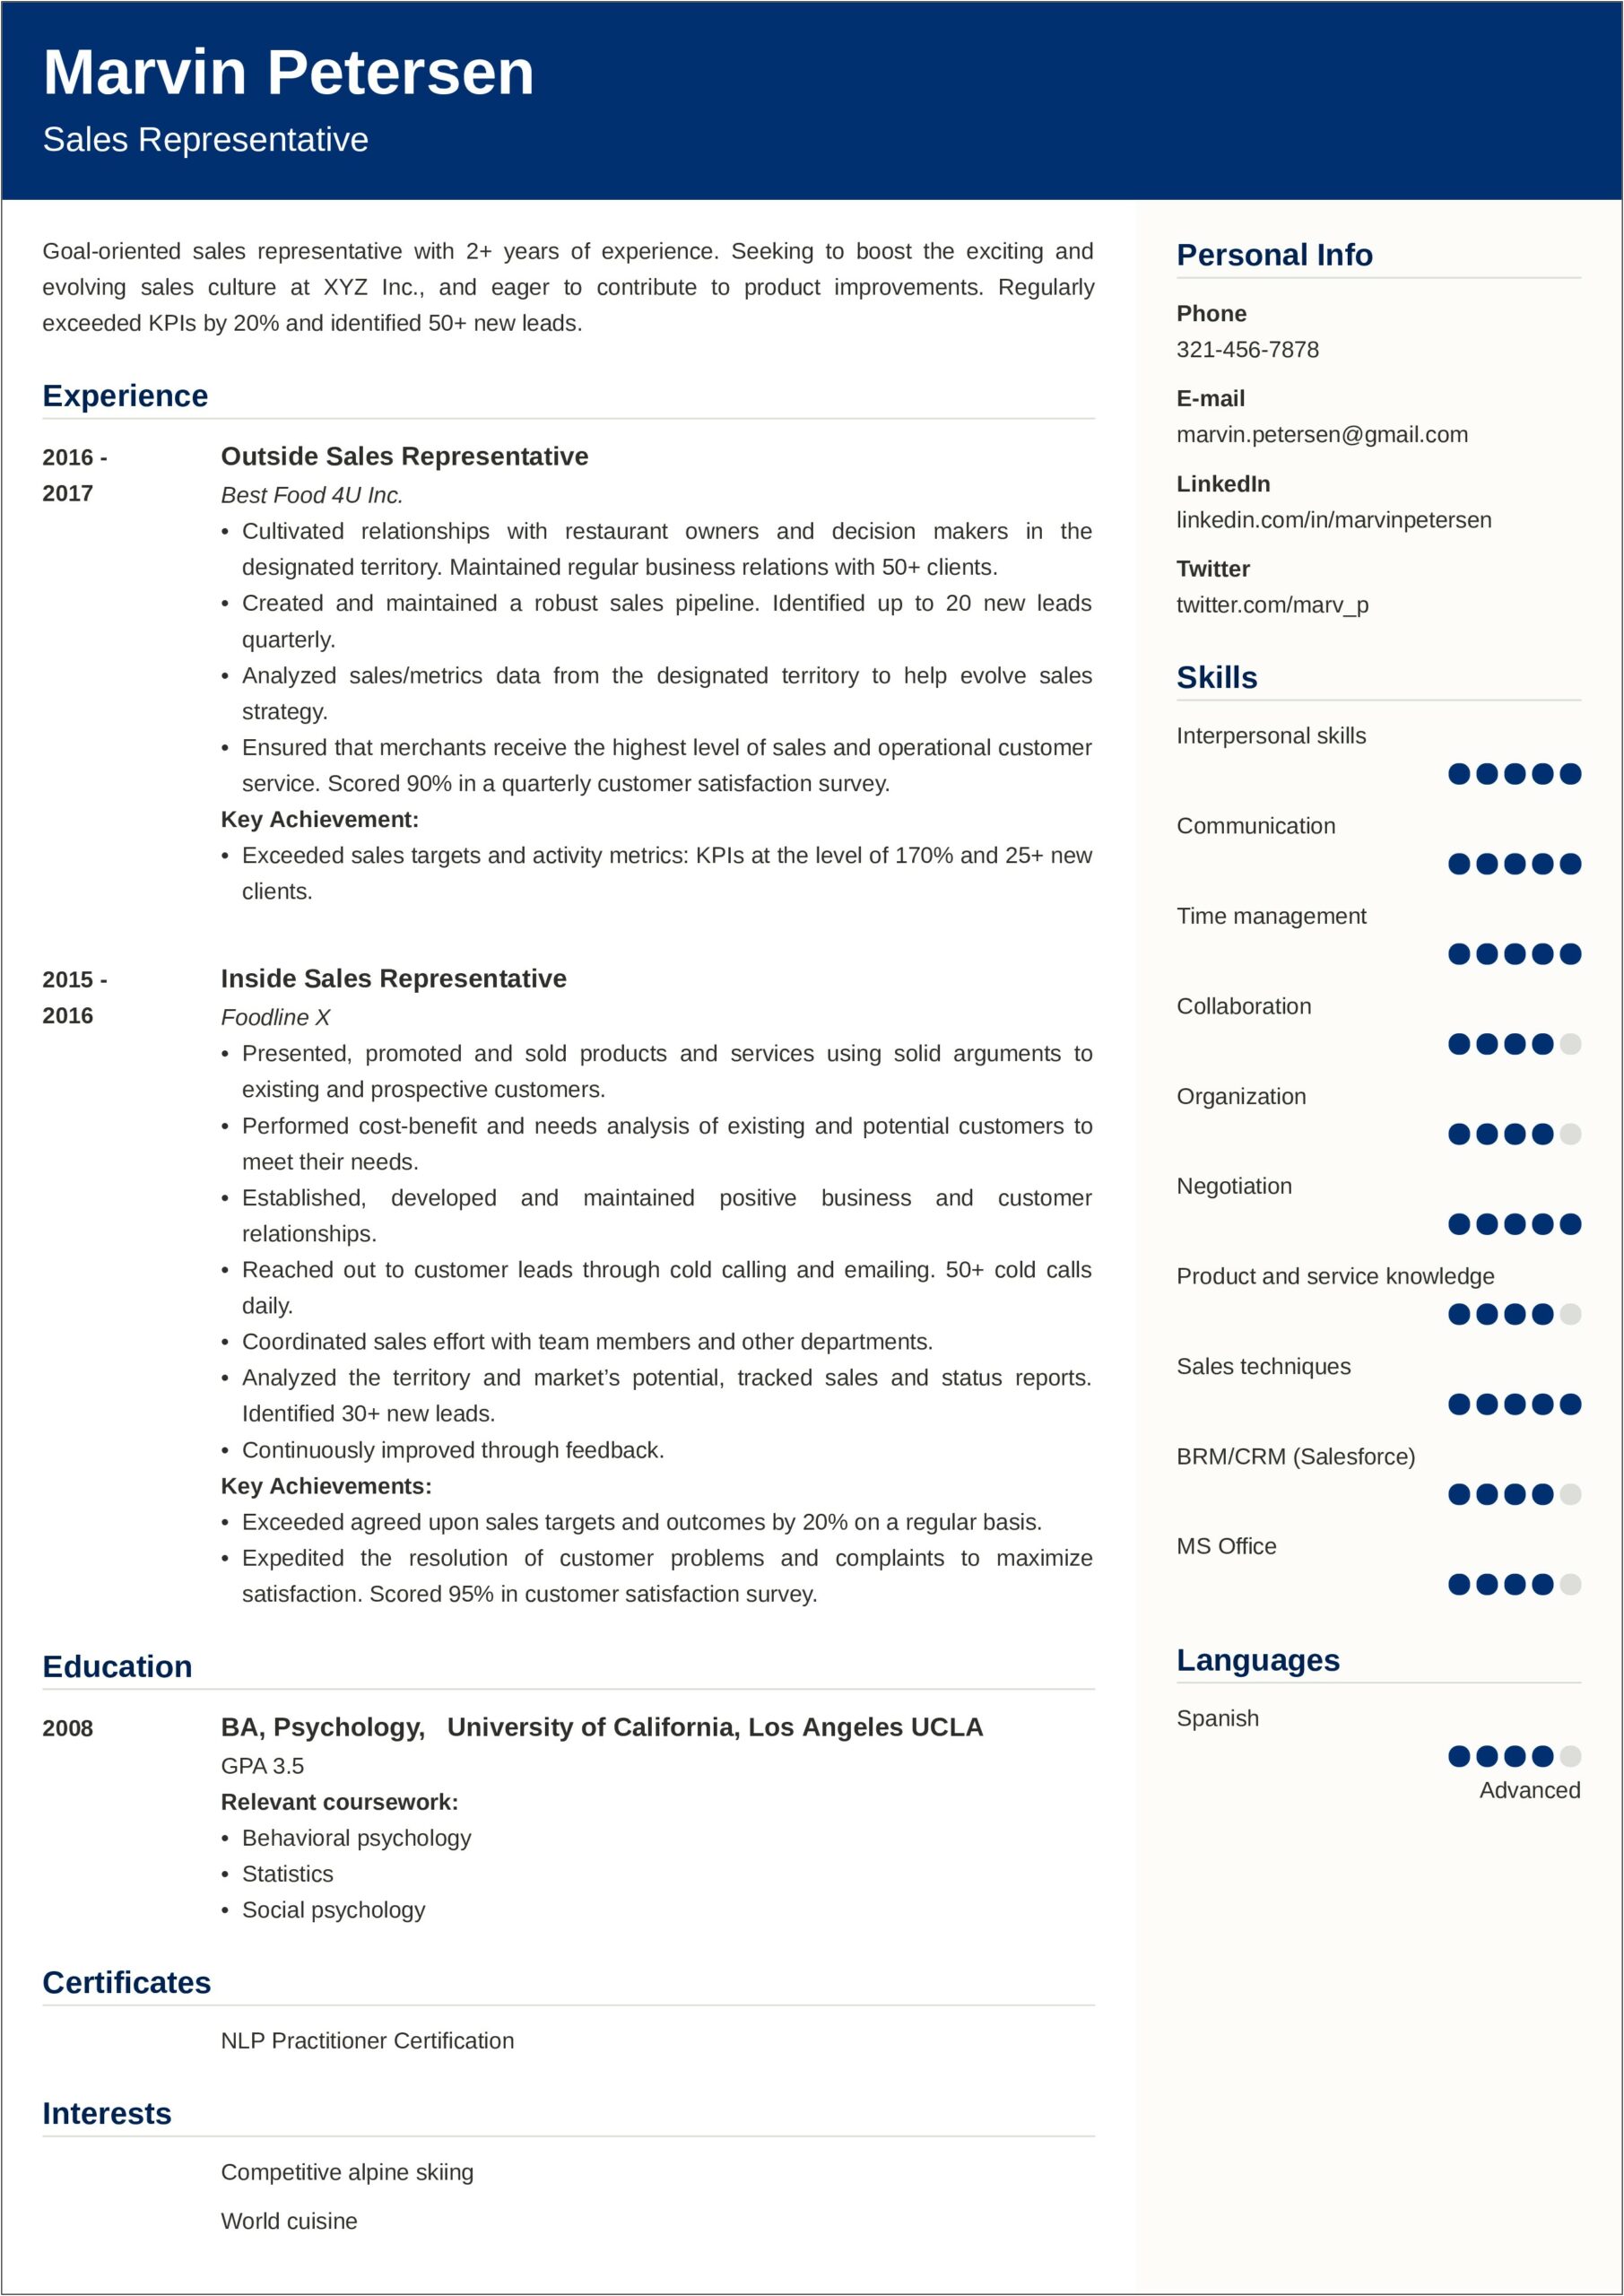 Examples Of Sales Executive Resumes